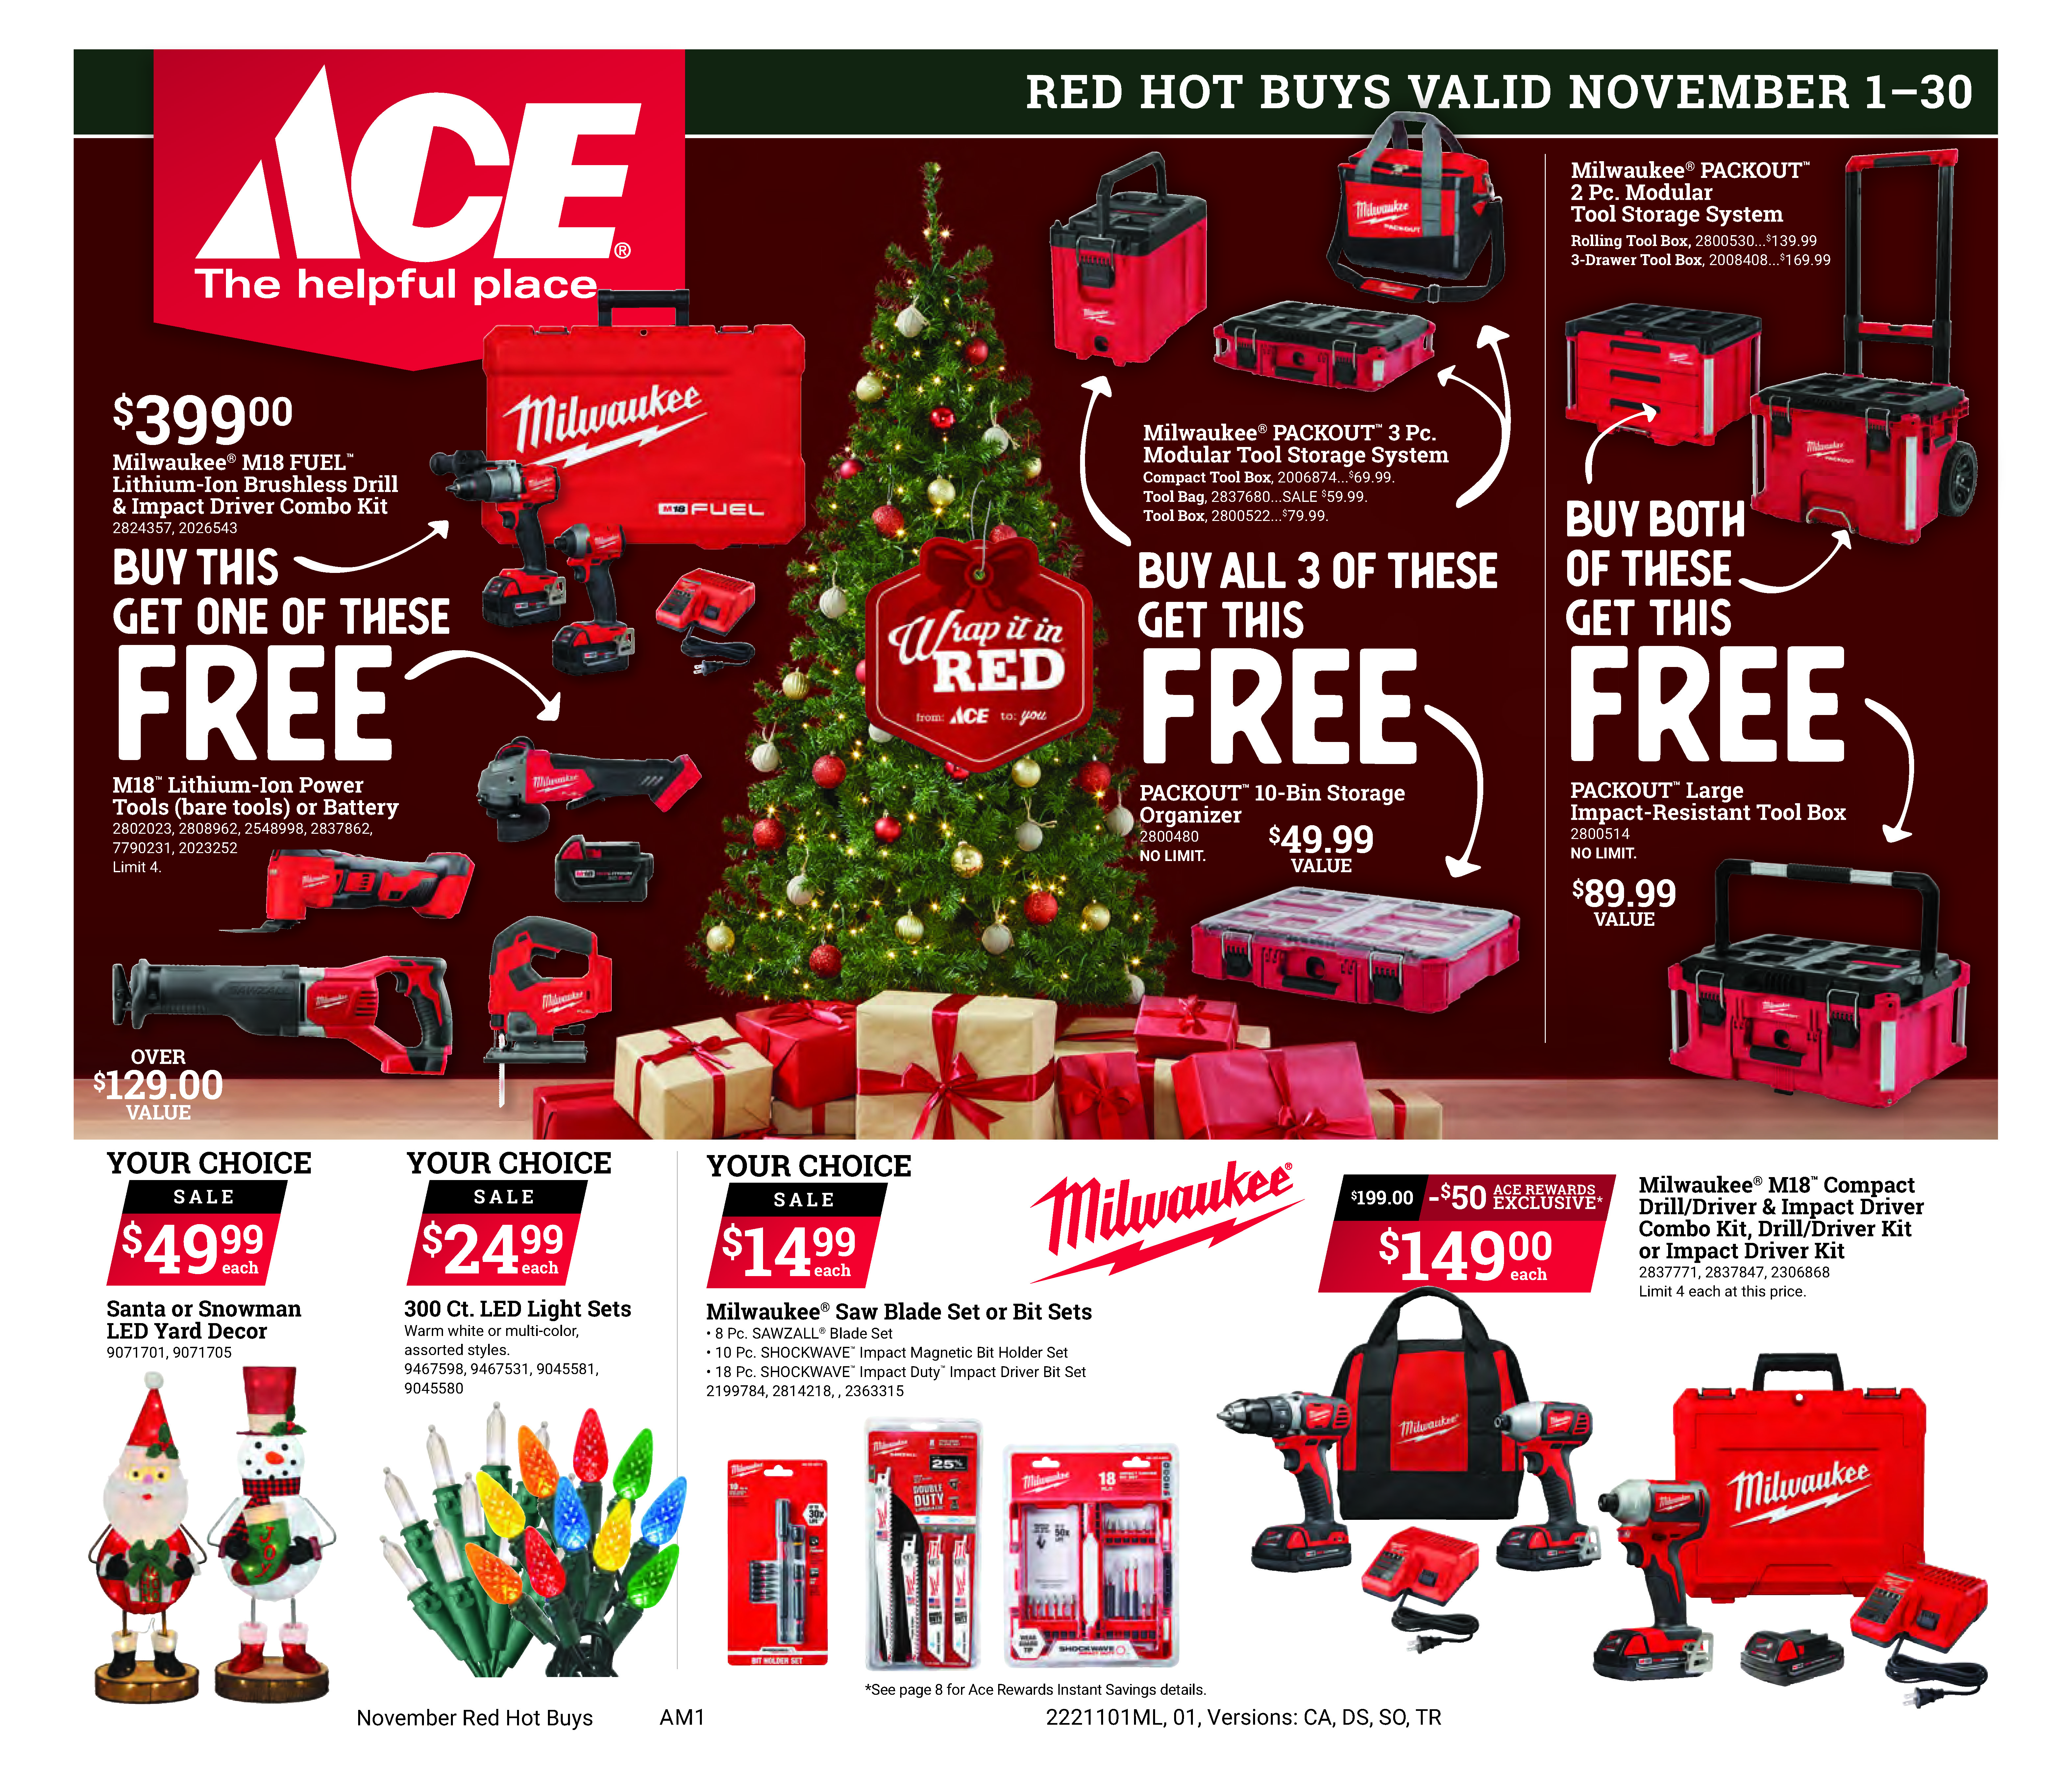 NOVEMBER DEALS AT YOUR LOCAL ACE!